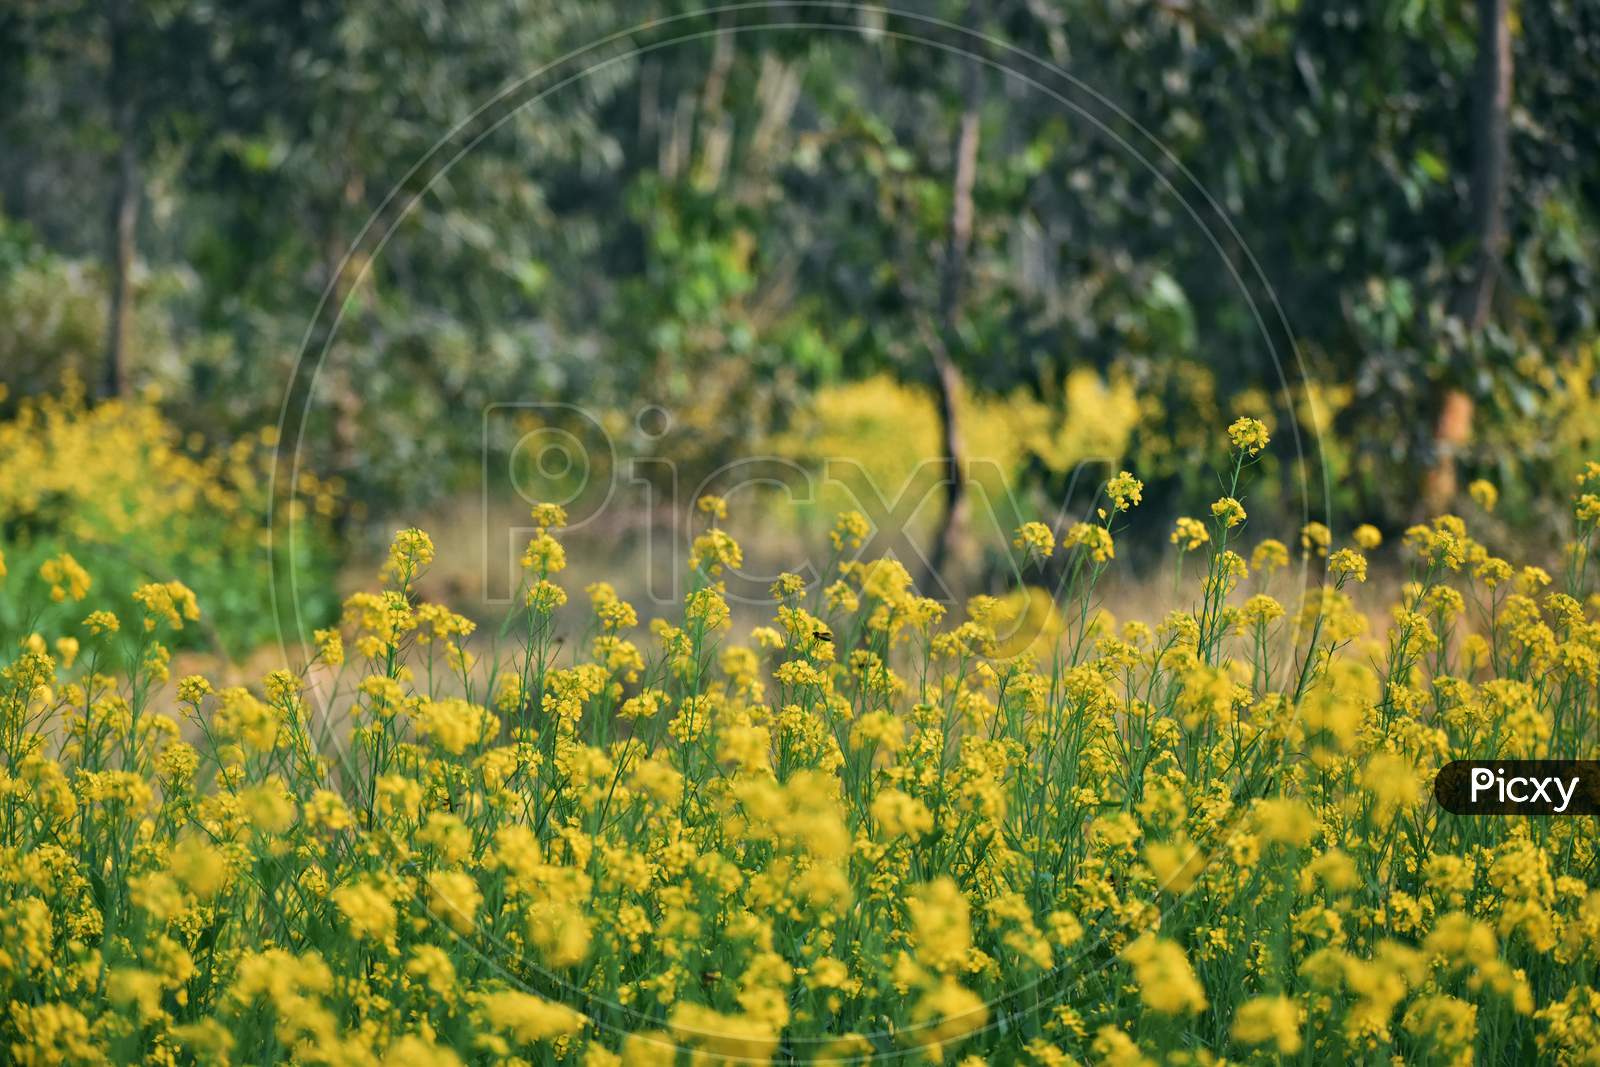 Green And Yellow Mustard Field Just Beside A Forest